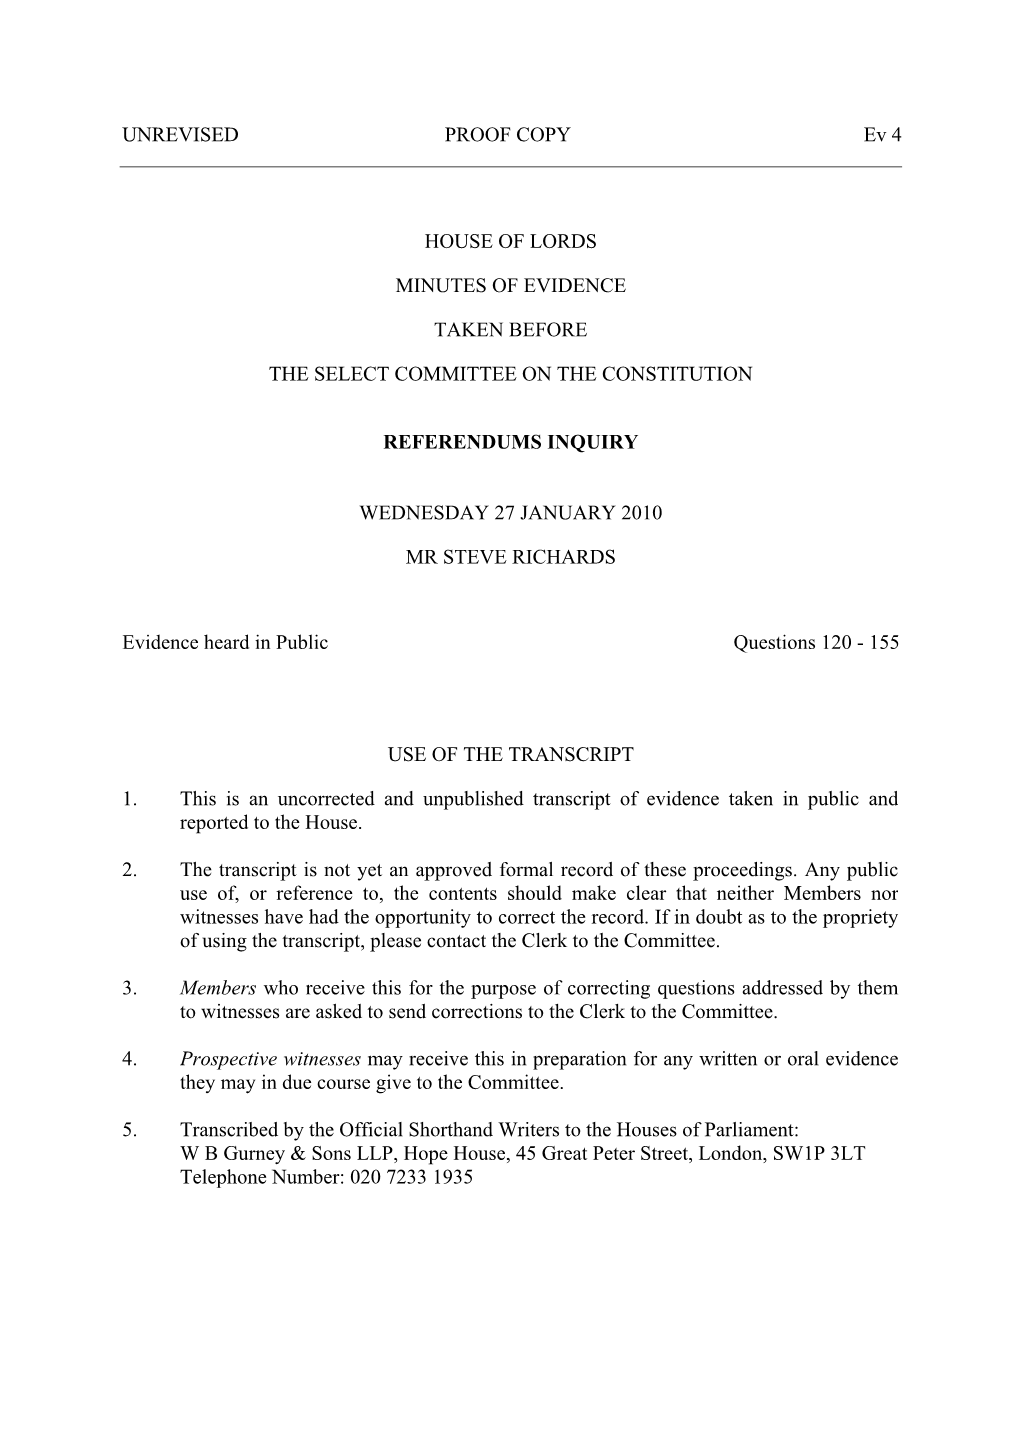 UNREVISED PROOF COPY Ev 4 HOUSE of LORDS MINUTES OF